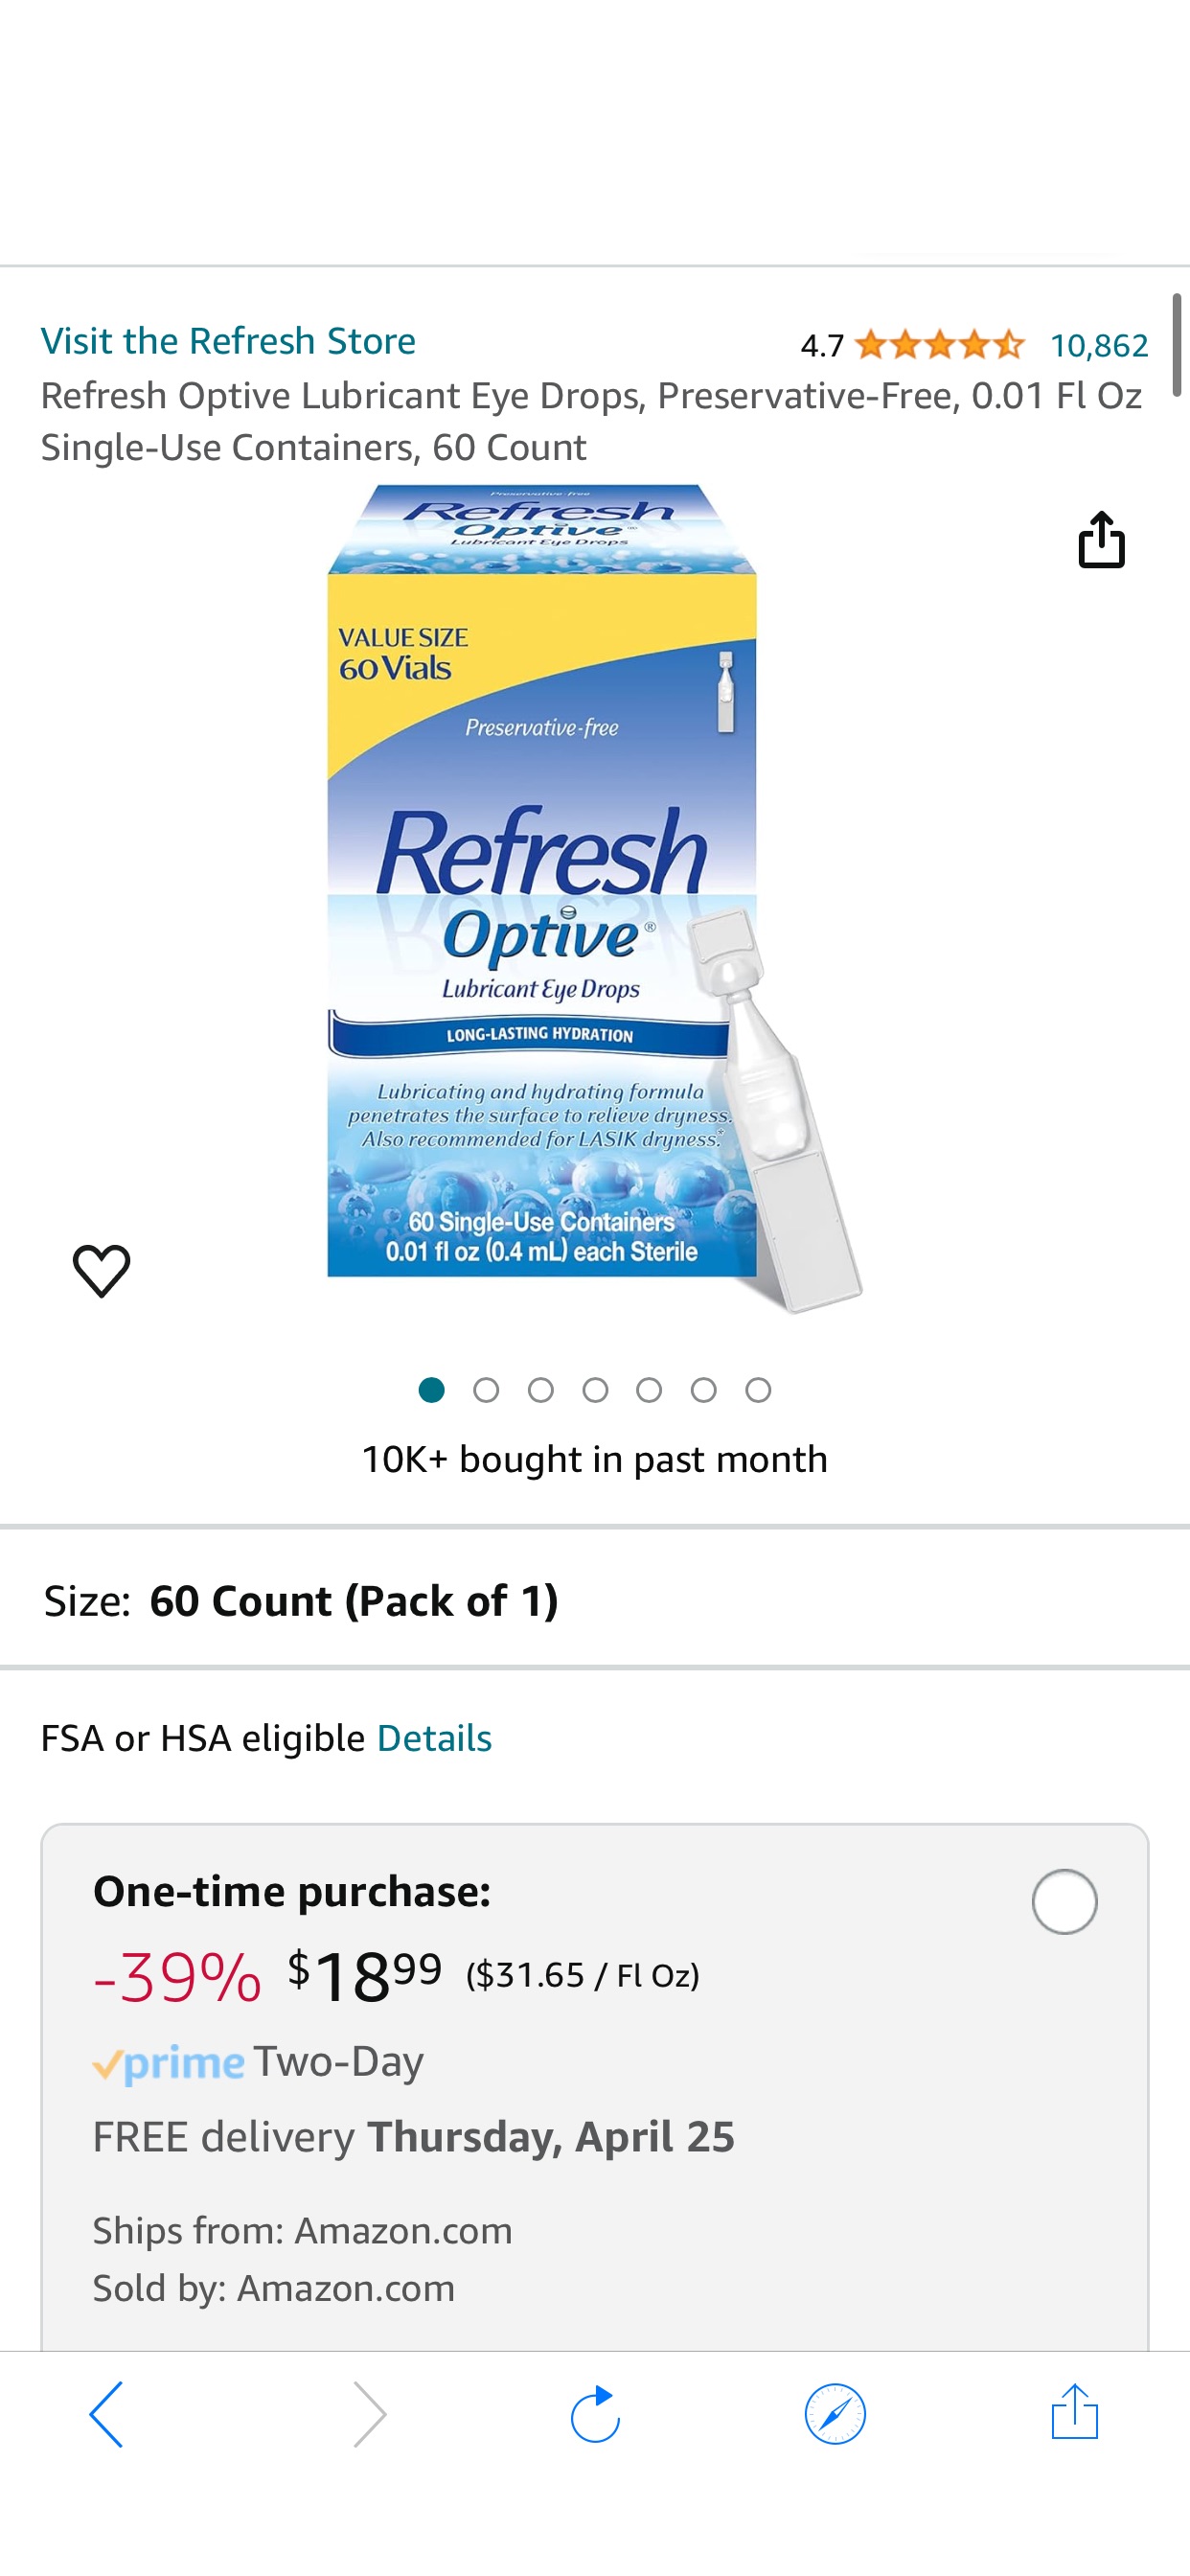 Amazon.com: Refresh Optive Lubricant Eye Drops, Preservative-Free, 0.01 Fl Oz Single-Use Containers, 60 Count : Health & Household 润滑眼液